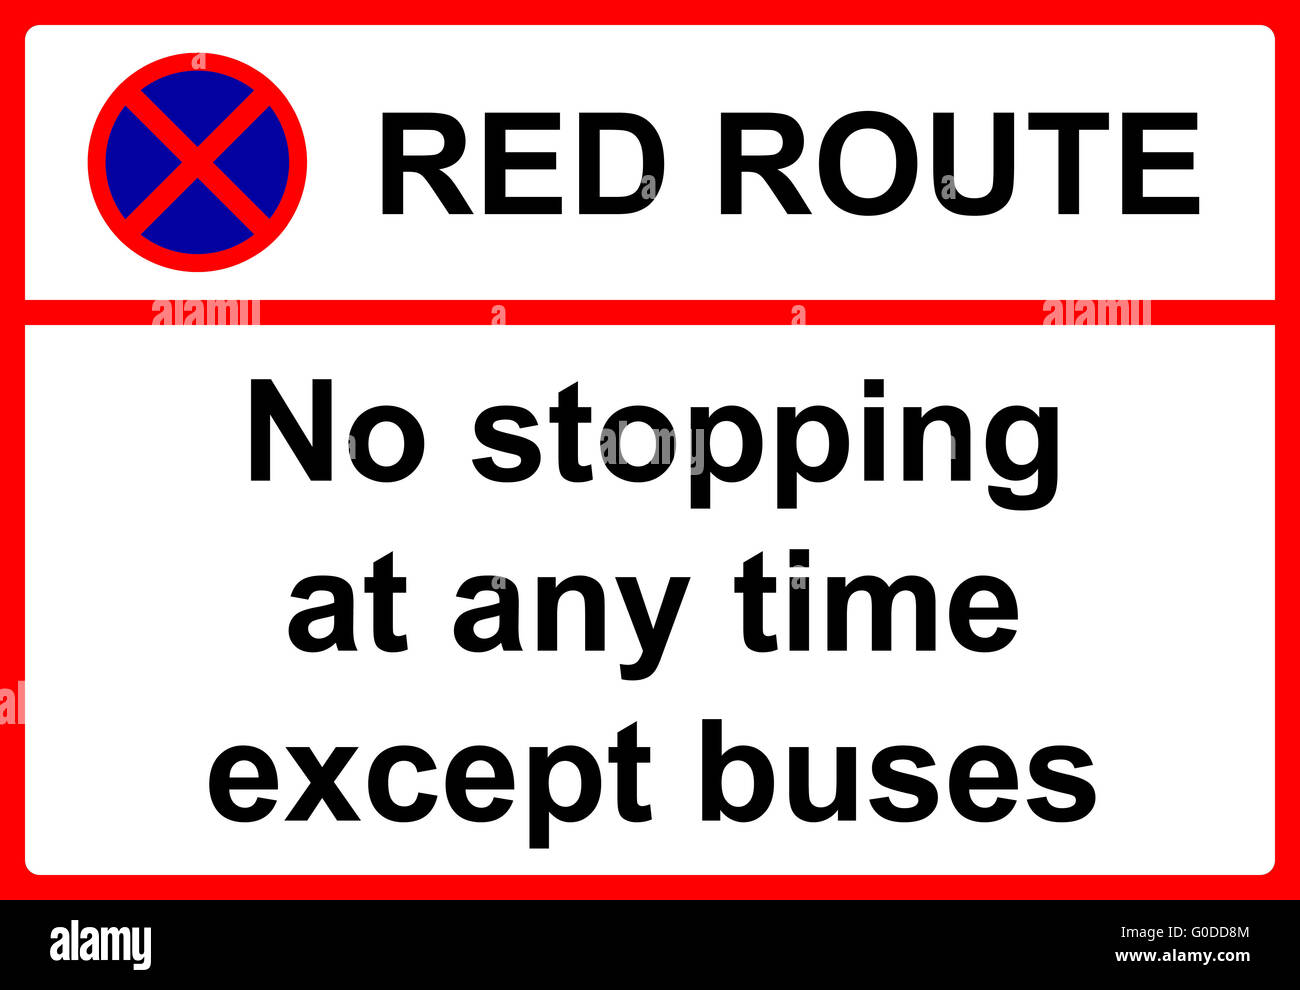 No stopping during period indicated except for buses sign Stock Photo